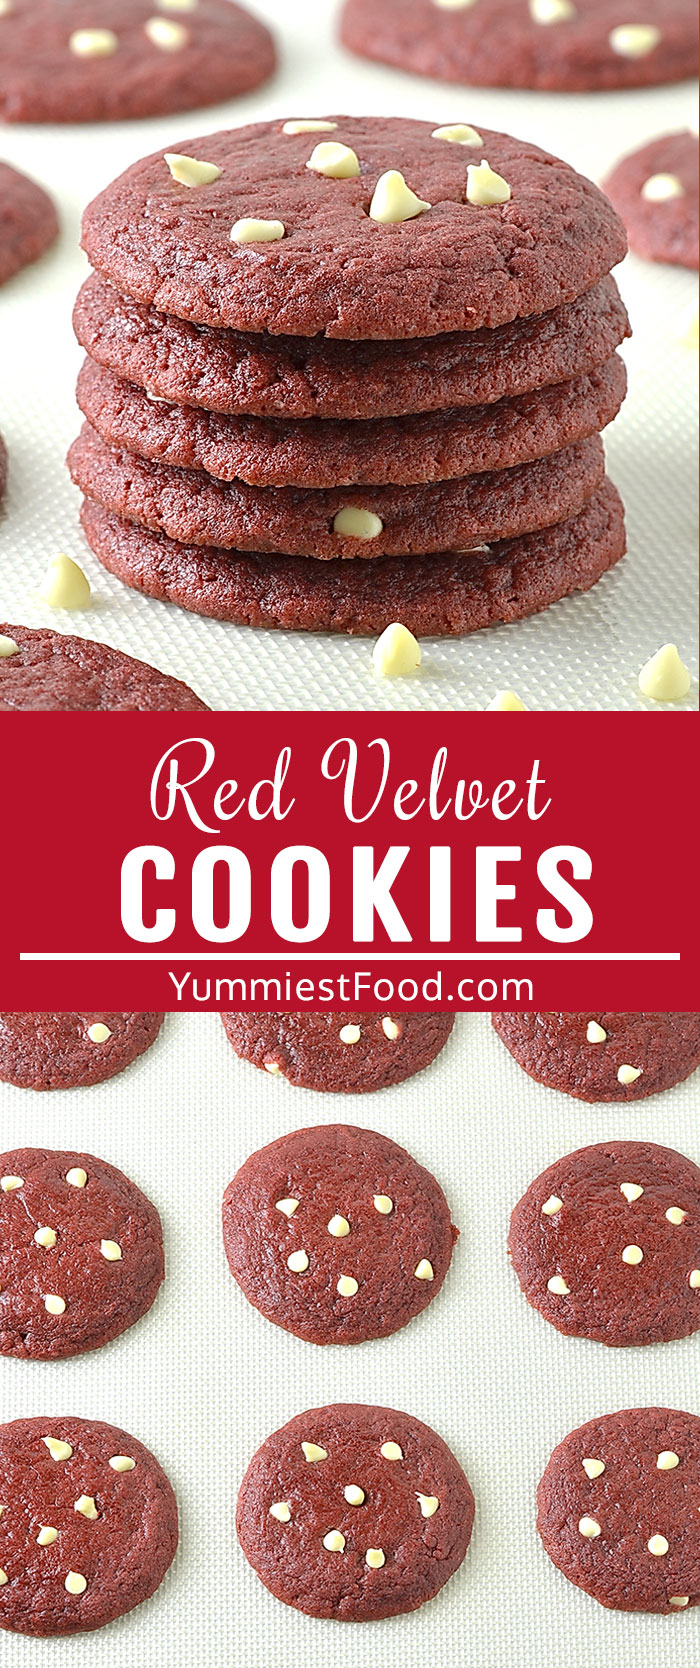 Red Velvet White Chocolate Chip Cookies is a special recipe for a special occasion Valentine's Day! They turn out soft and chewy with a beautiful red color makes them perfect for Valentine's Day or whenever you are craving red velvet! #valentines #valentinesday #valentinesfood #valentinestreats #desserts #valentinescookies #cookies #easycookies #redvelvetcookies